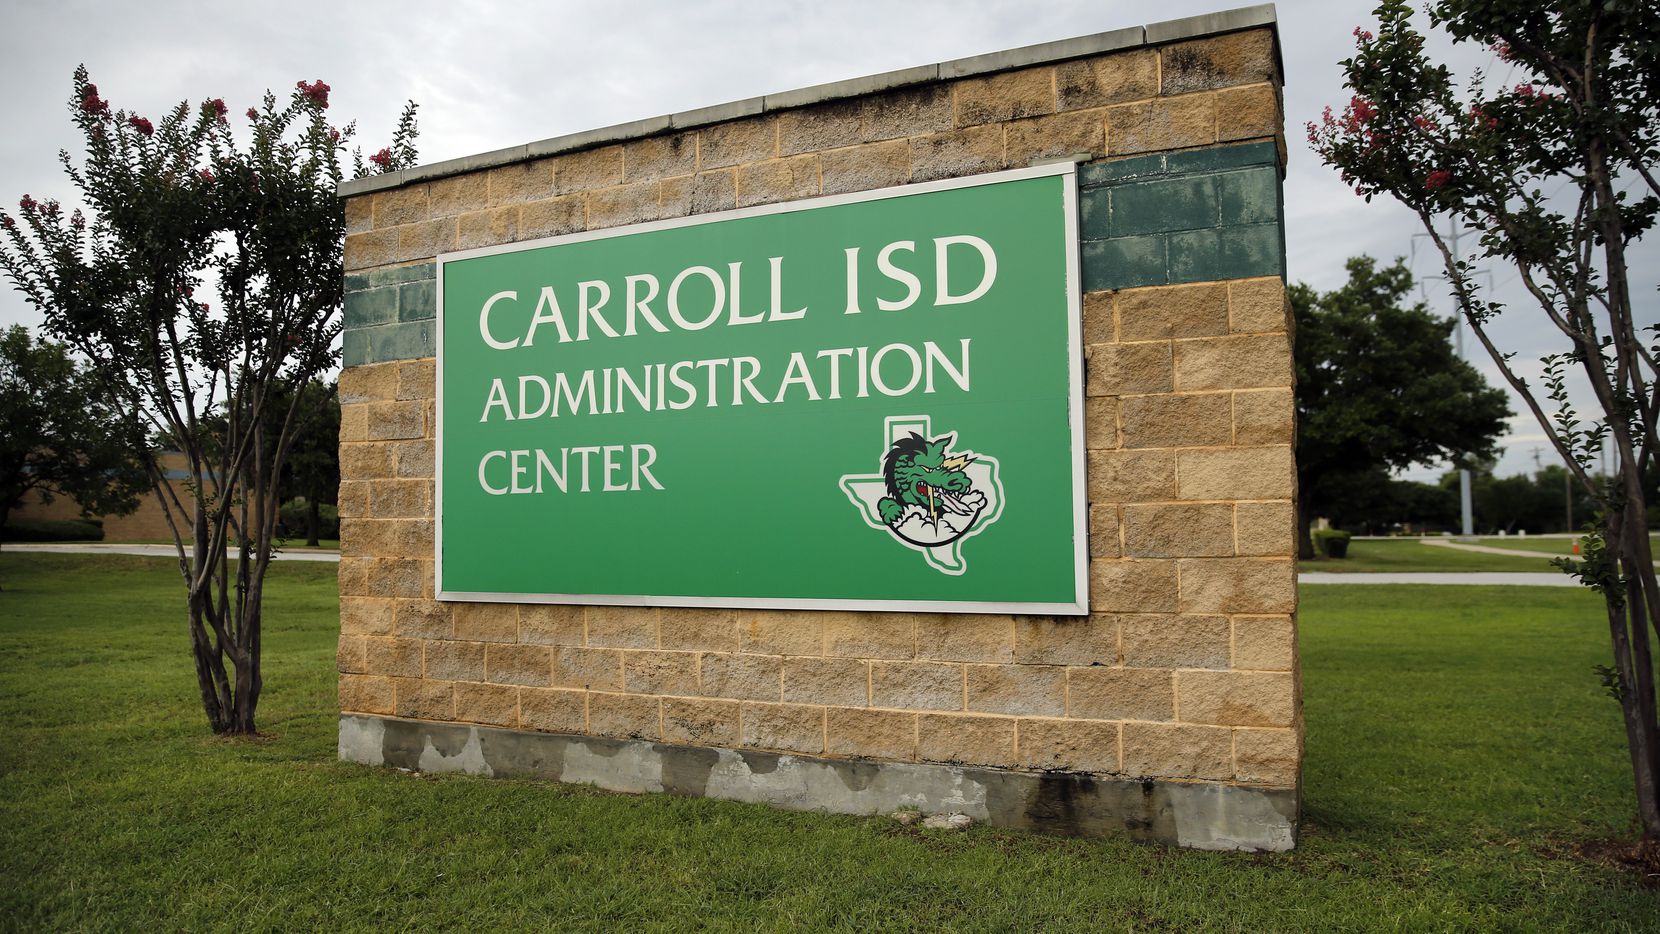 The Carroll ISD Administration Center in Southlake, Texas, Tuesday, June 23, 2020. (Tom...